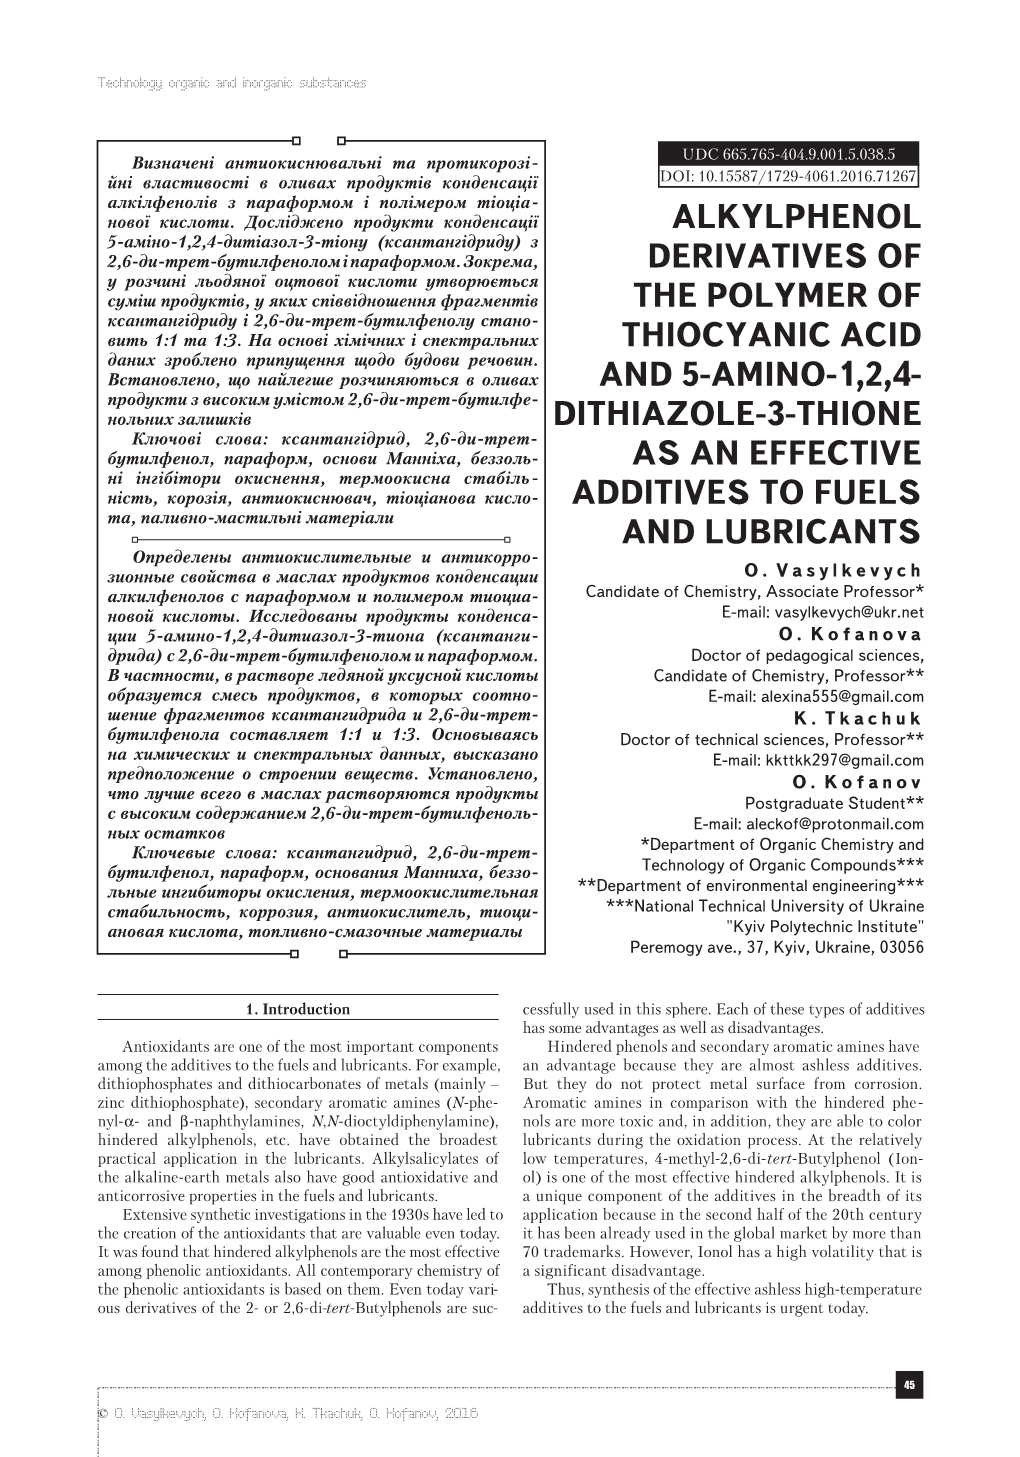 Dithiazole-3-Thione As an Effective Additives to Fu